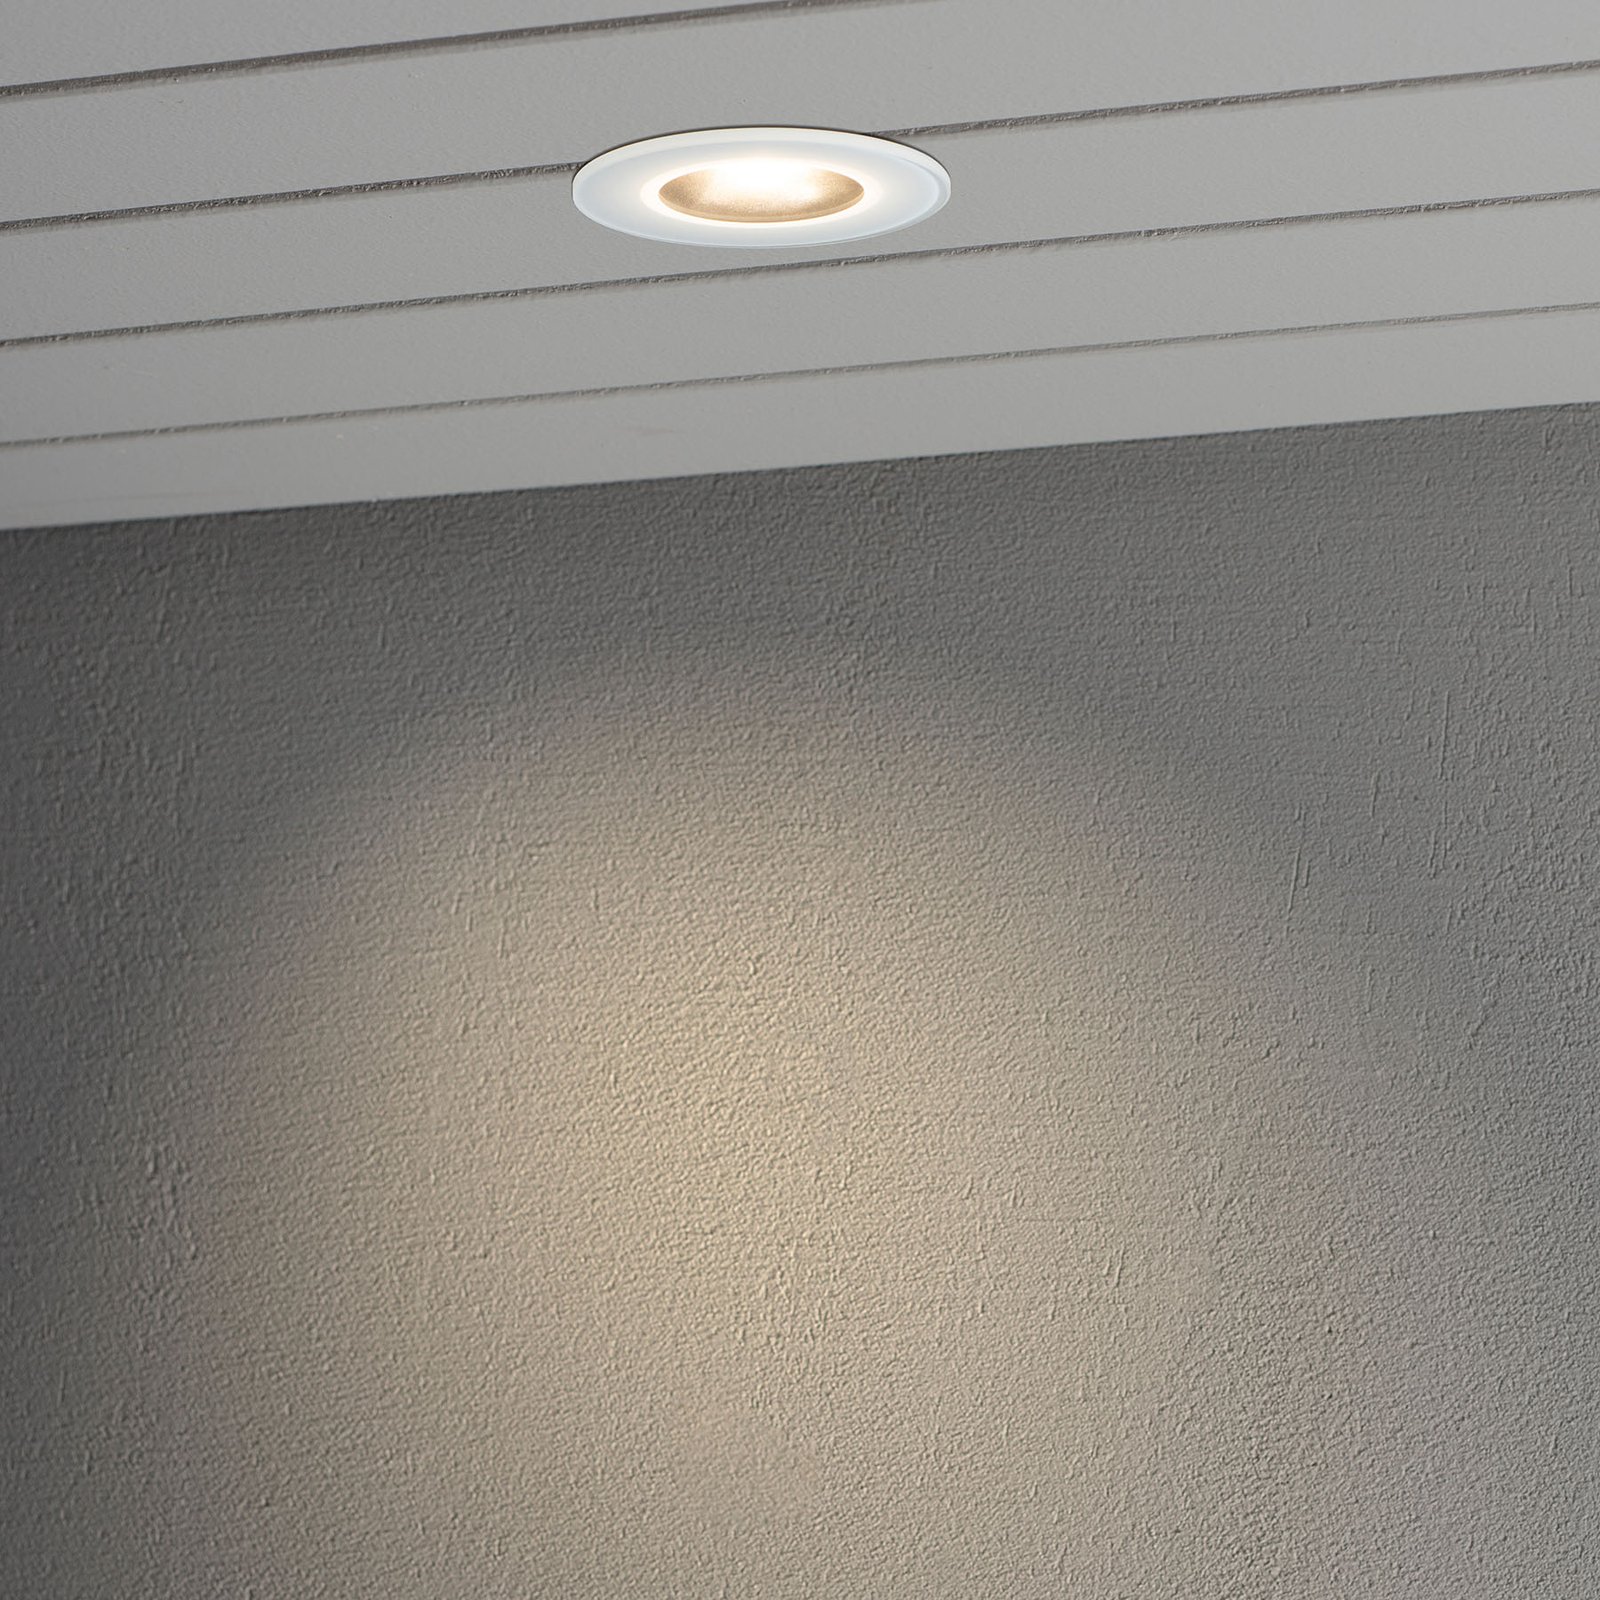 7875 LED recessed light outdoor ceiling, white